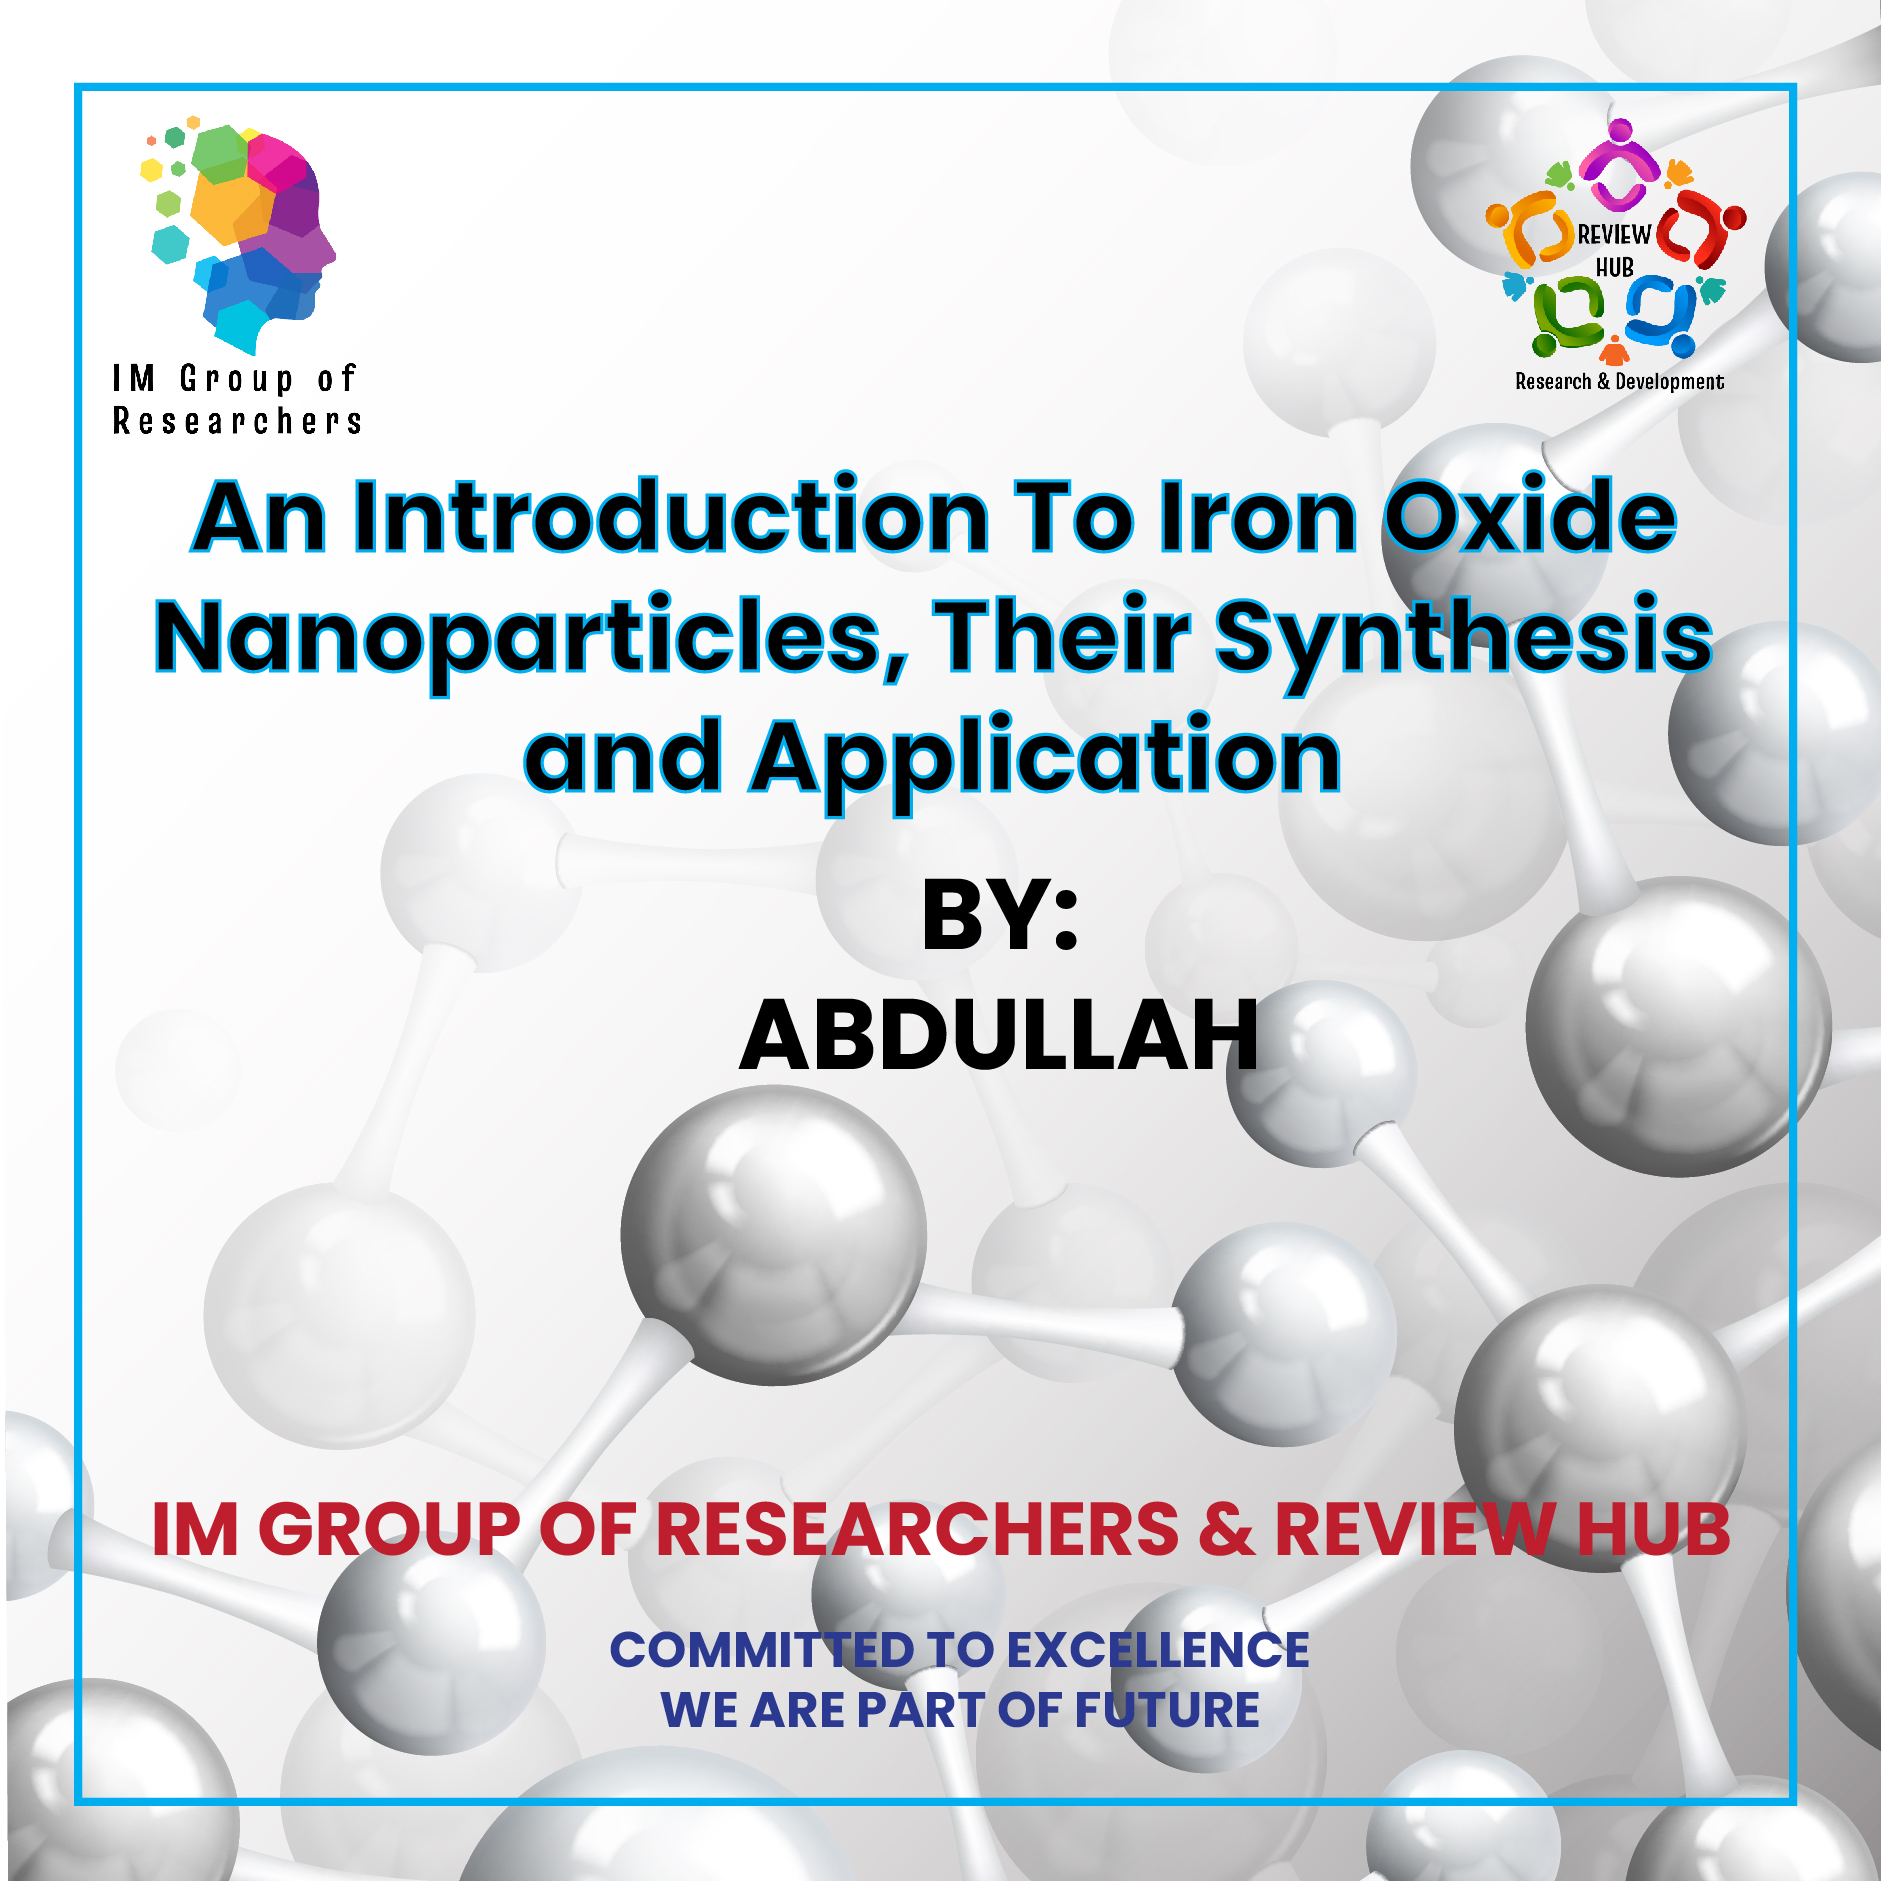 An Introduction To Iron Oxide Nanoparticles, Their Synthesis and Application